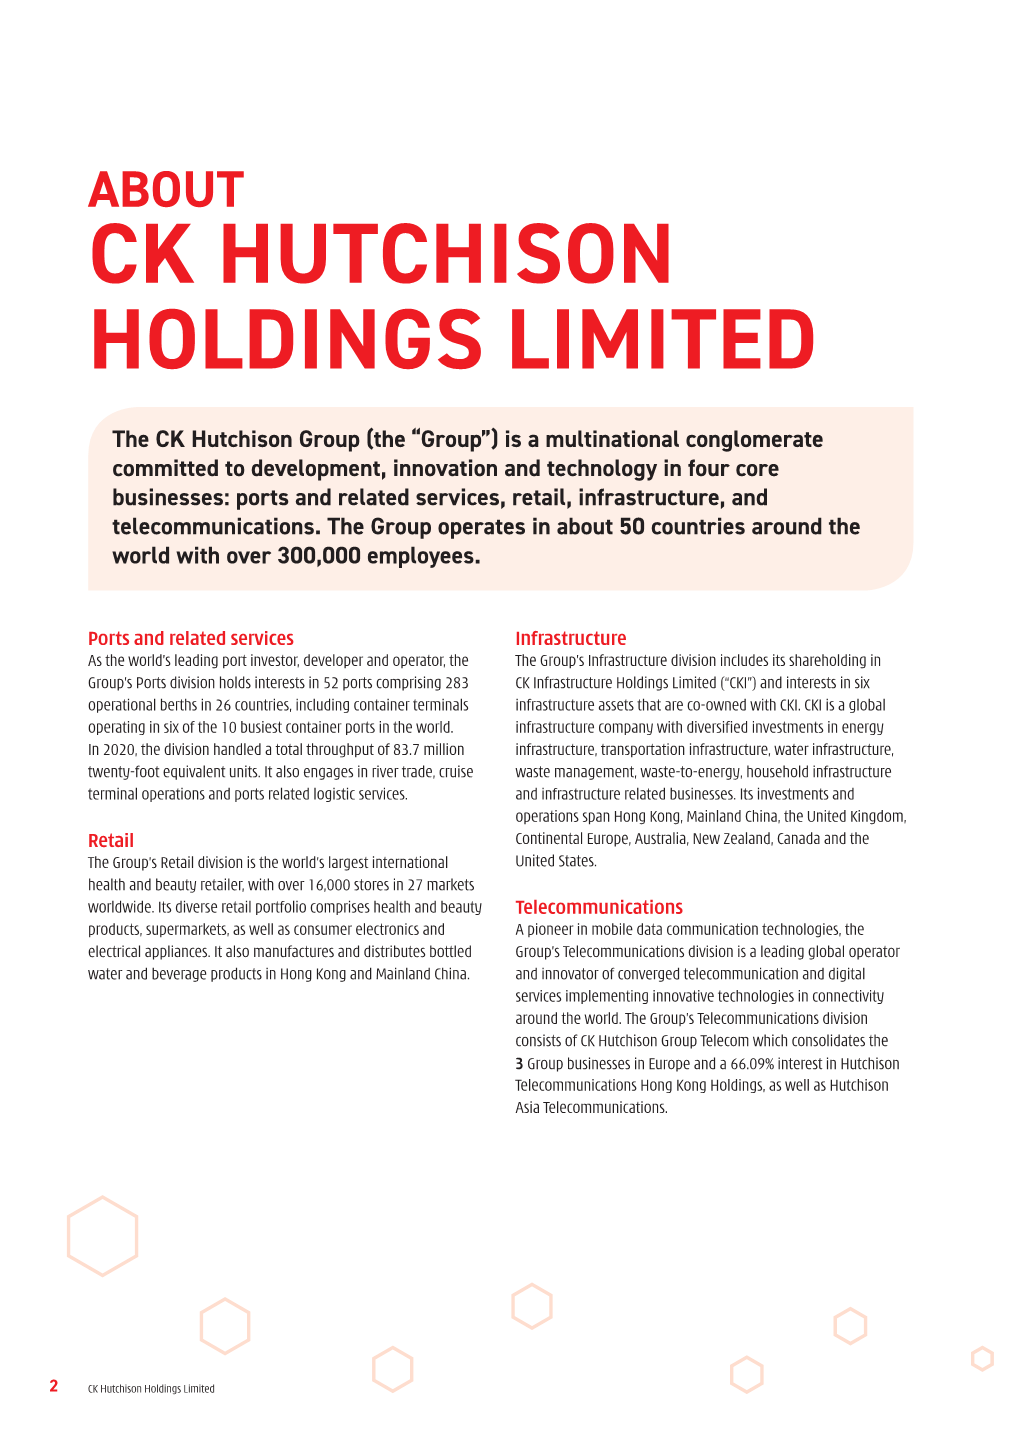 About Ck Hutchison Holdings Limited